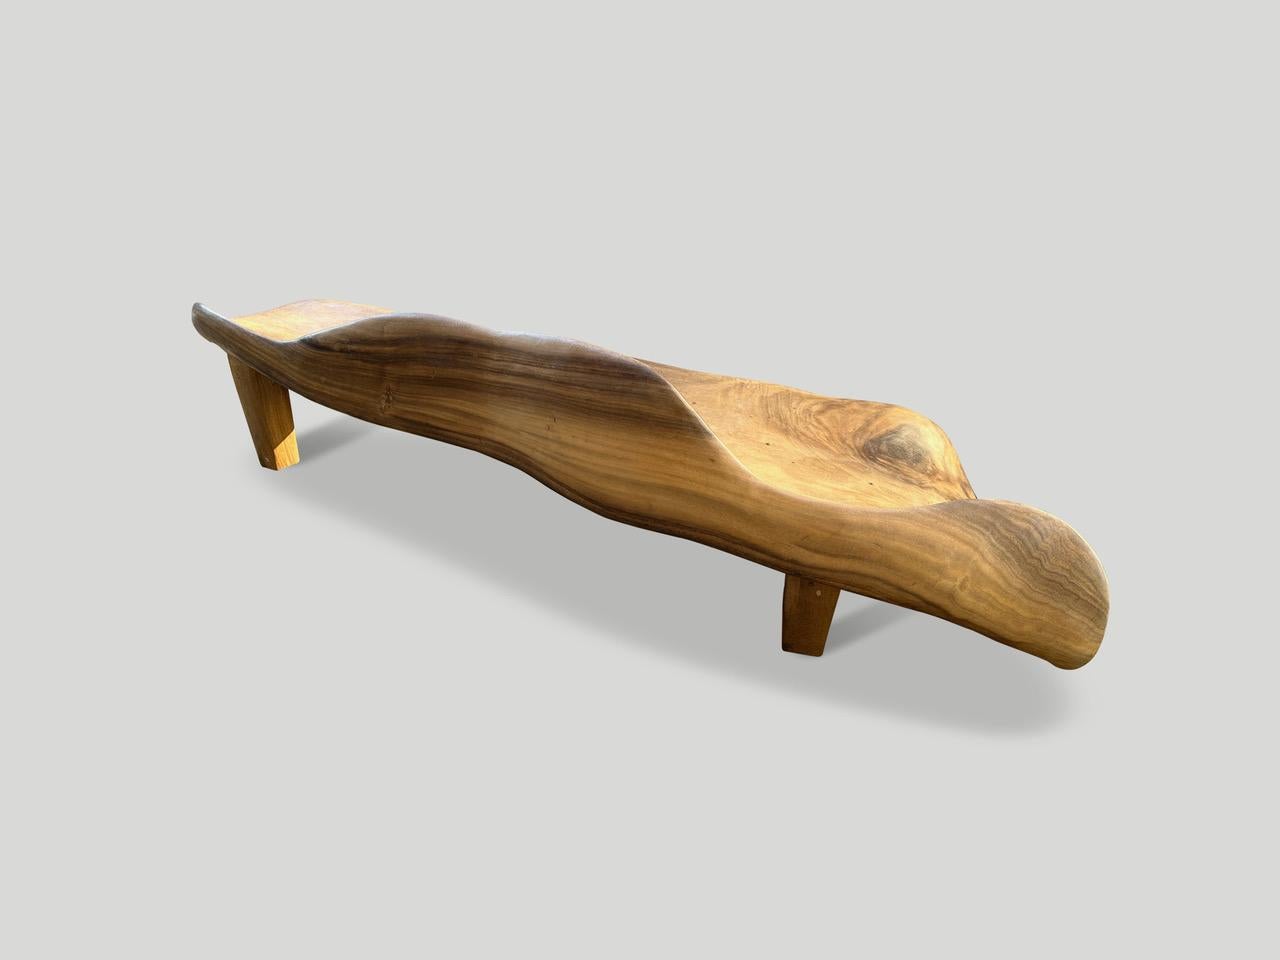 Impressive one of a kind bench with the seat and back rest hand carved seamlessly from a single piece of suar wood. We added minimalist legs and finished this rare piece with a natural oil revealing the beautiful wood grain. Both usable and